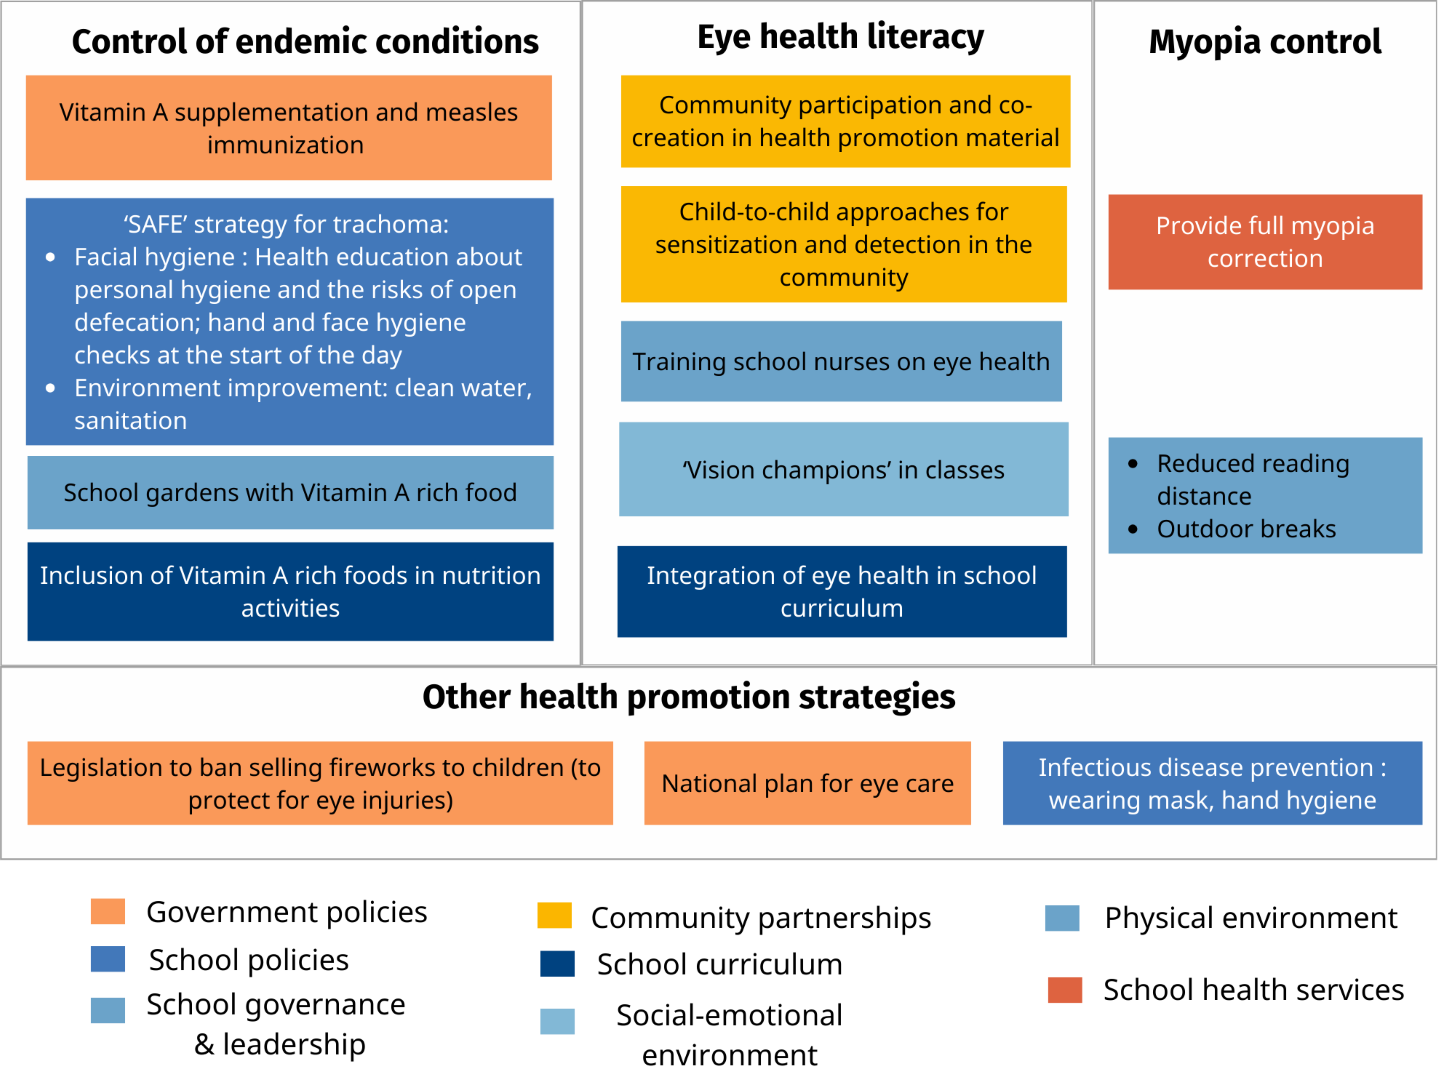 A diagram divided into four sections. The first section, "Control of endemic conditions," includes strategies like Vitamin A supplementation and measles immunization, SAFE strategy for trachoma, and inclusion of Vitamin A-rich foods in nutrition activities. The second section, "Eye health literacy," includes community participation, child-to-child approaches, training school nurses, vision champions in classes, and integration of eye health in the school curriculum. The third section, "Myopia control," includes providing full myopia correction, reduced reading distance, and outdoor breaks. The fourth section, "Other health promotion strategies," includes banning the sale of fireworks to children, national plan for eye care, and infectious disease prevention.